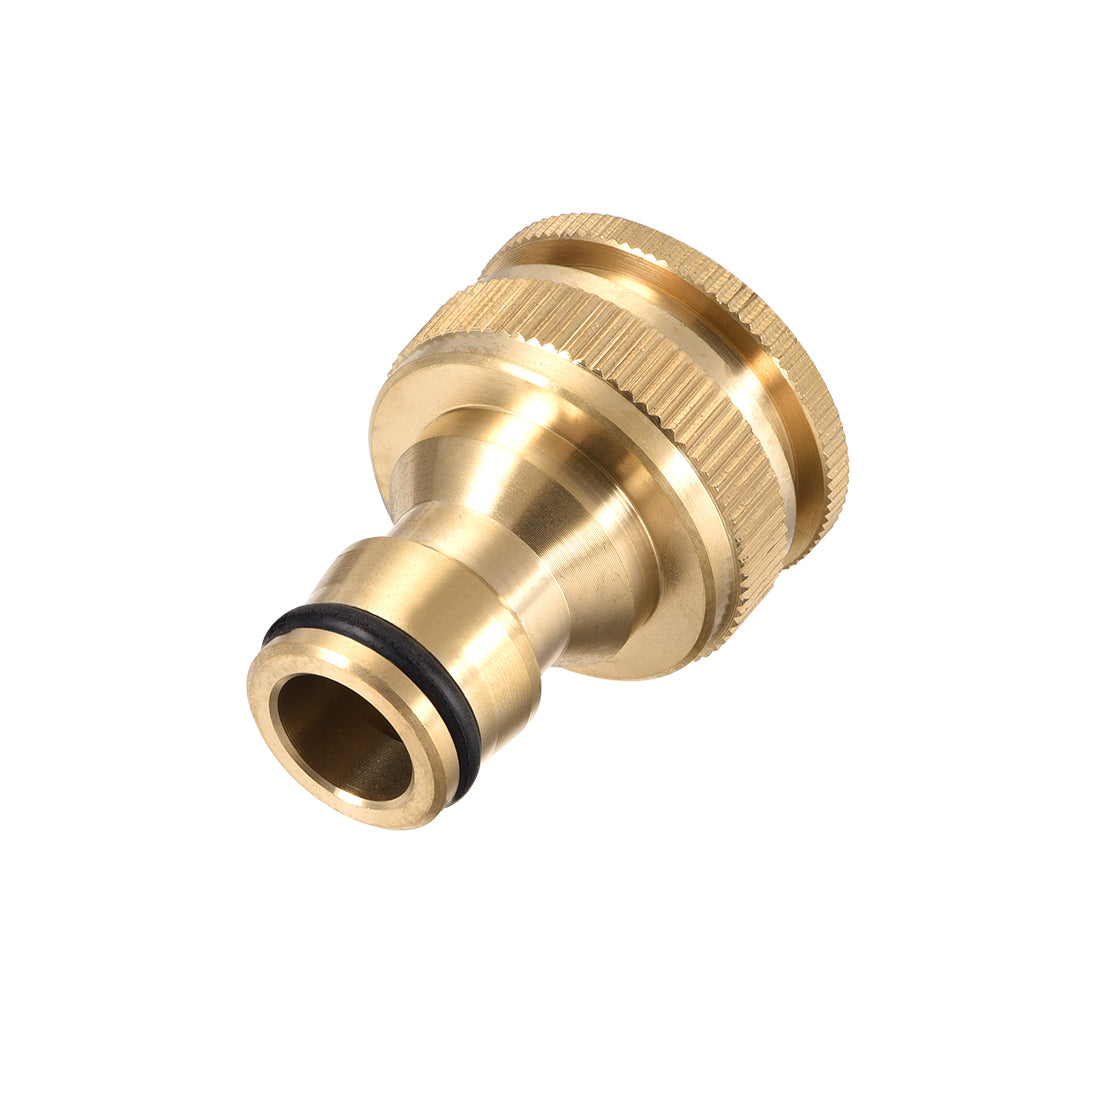 uxcell Uxcell Brass Faucet Tap Quick Connector G1/2 G3/4 Female Thread Hose Pipe Adapter 4pcs